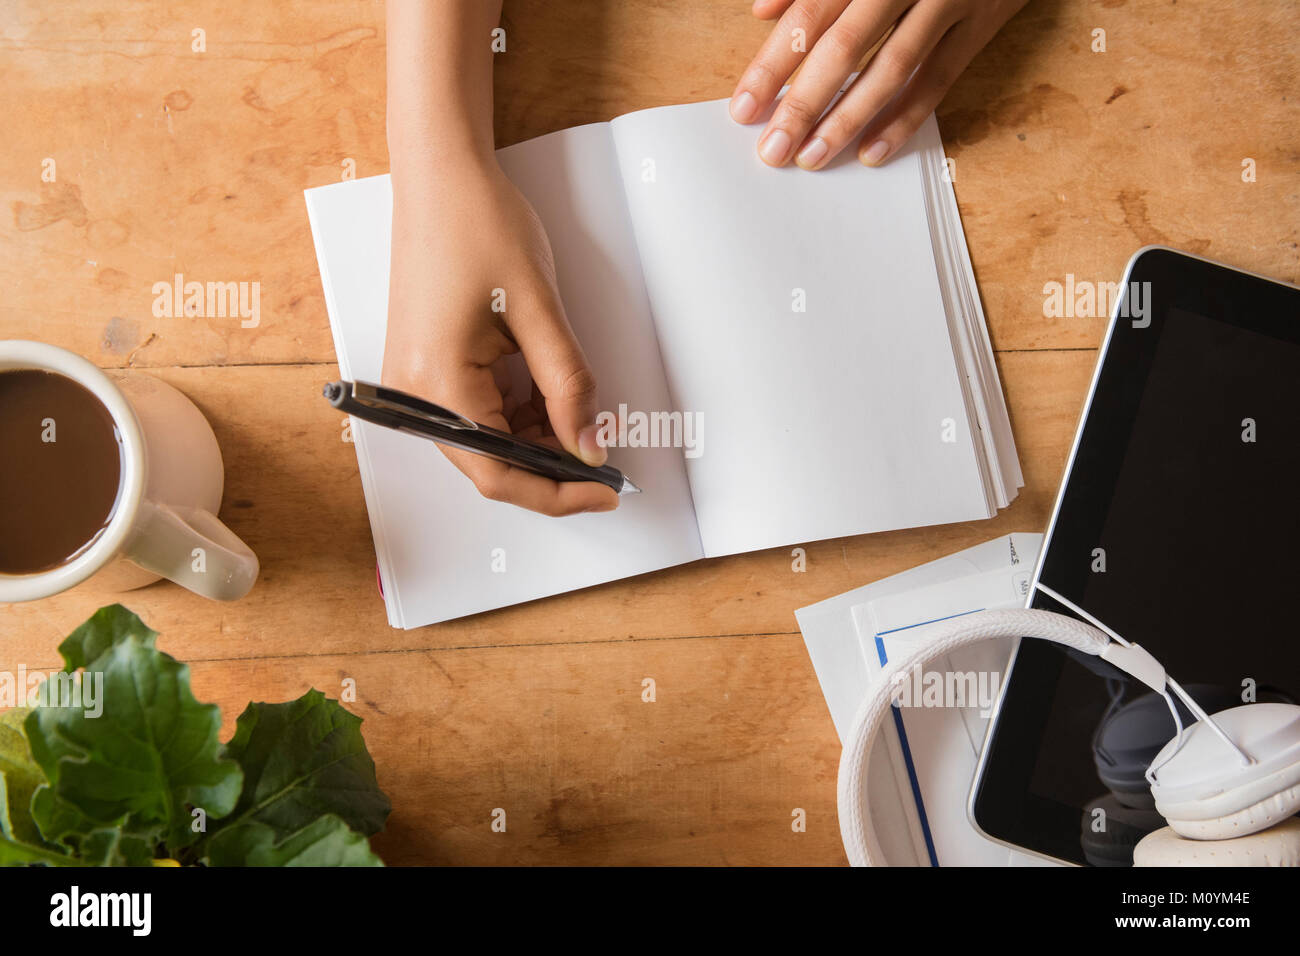 Hands of African American woman writing in journal Stock Photo